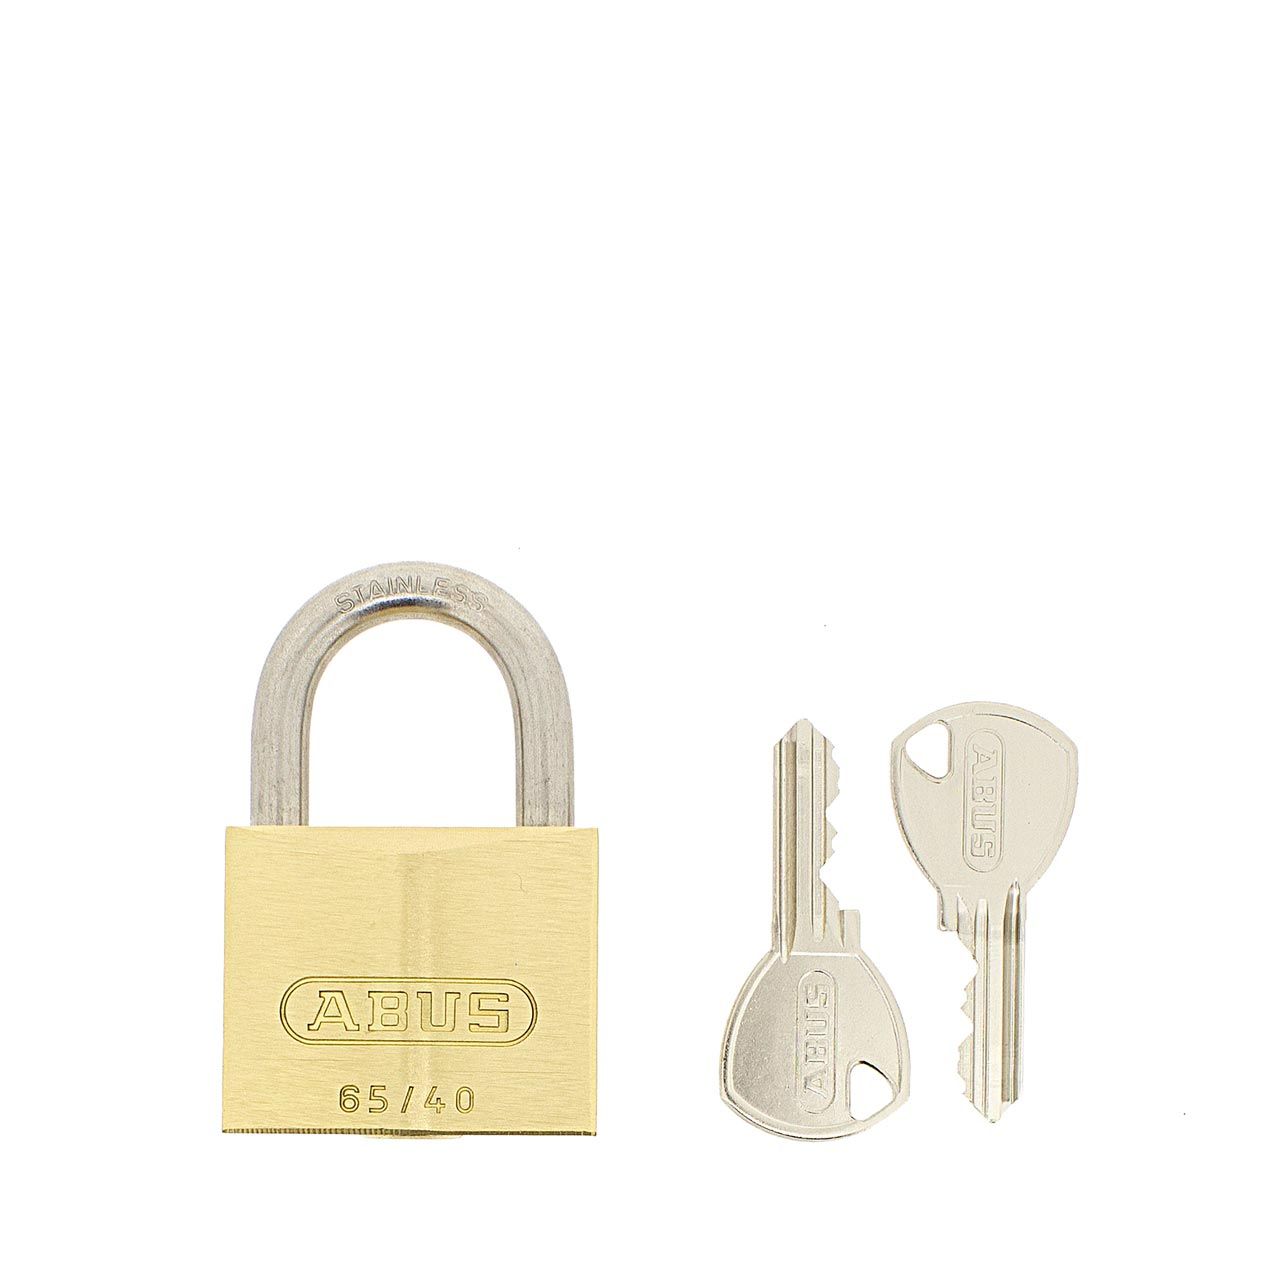 Dimensions Image: ABUS 65IB/40 Brass Padlock - Stainless Steel Shackle